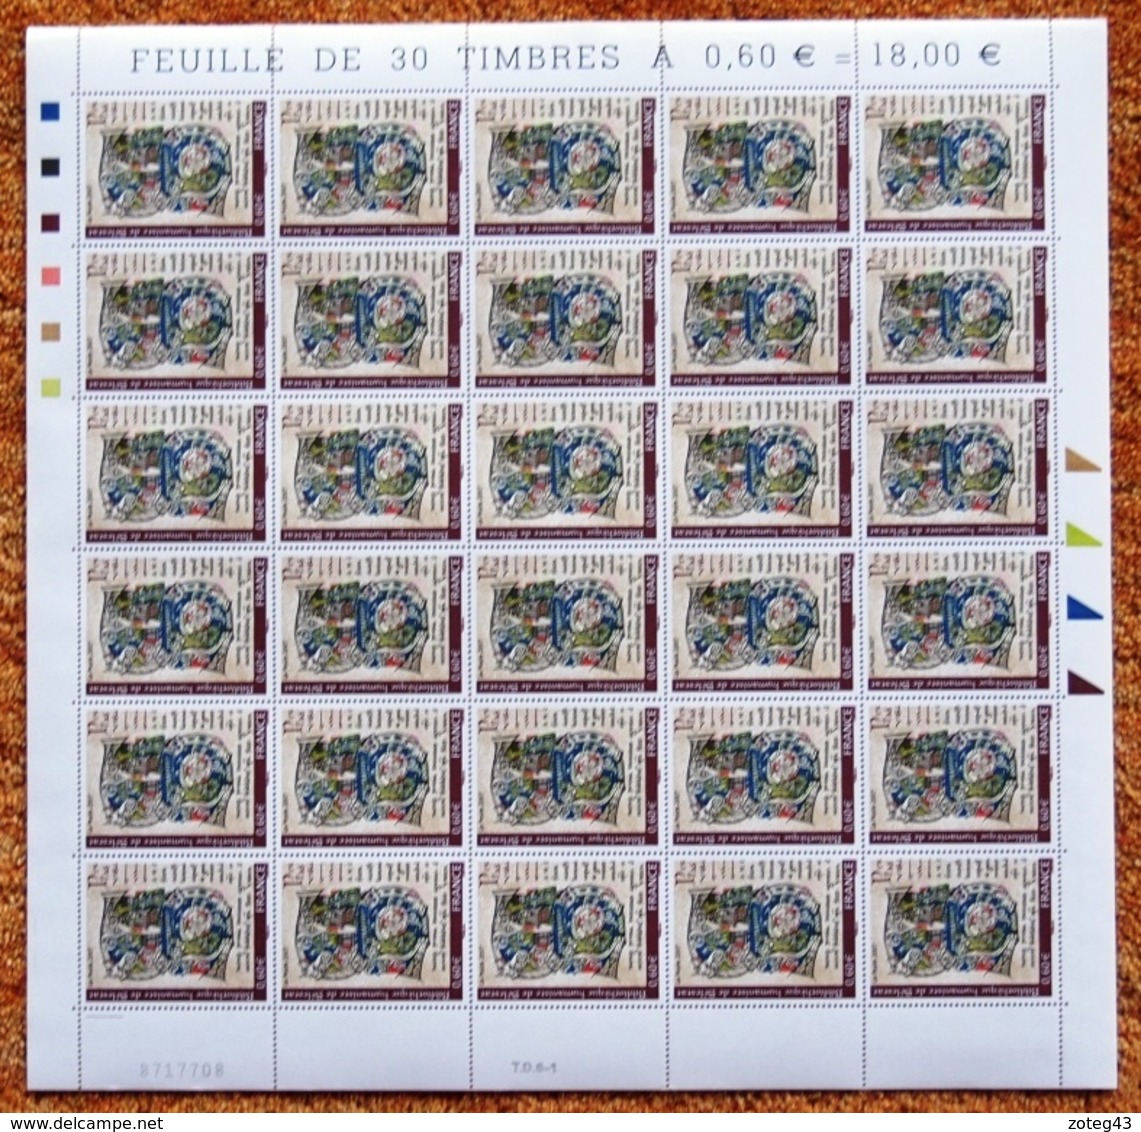 FRANCE 2007 FEUILLE COMPETE BIBLIOTHEQUE HUMANISTE SELESTAT YT 4013** ; 30 TIMBRES - Feuilles Complètes